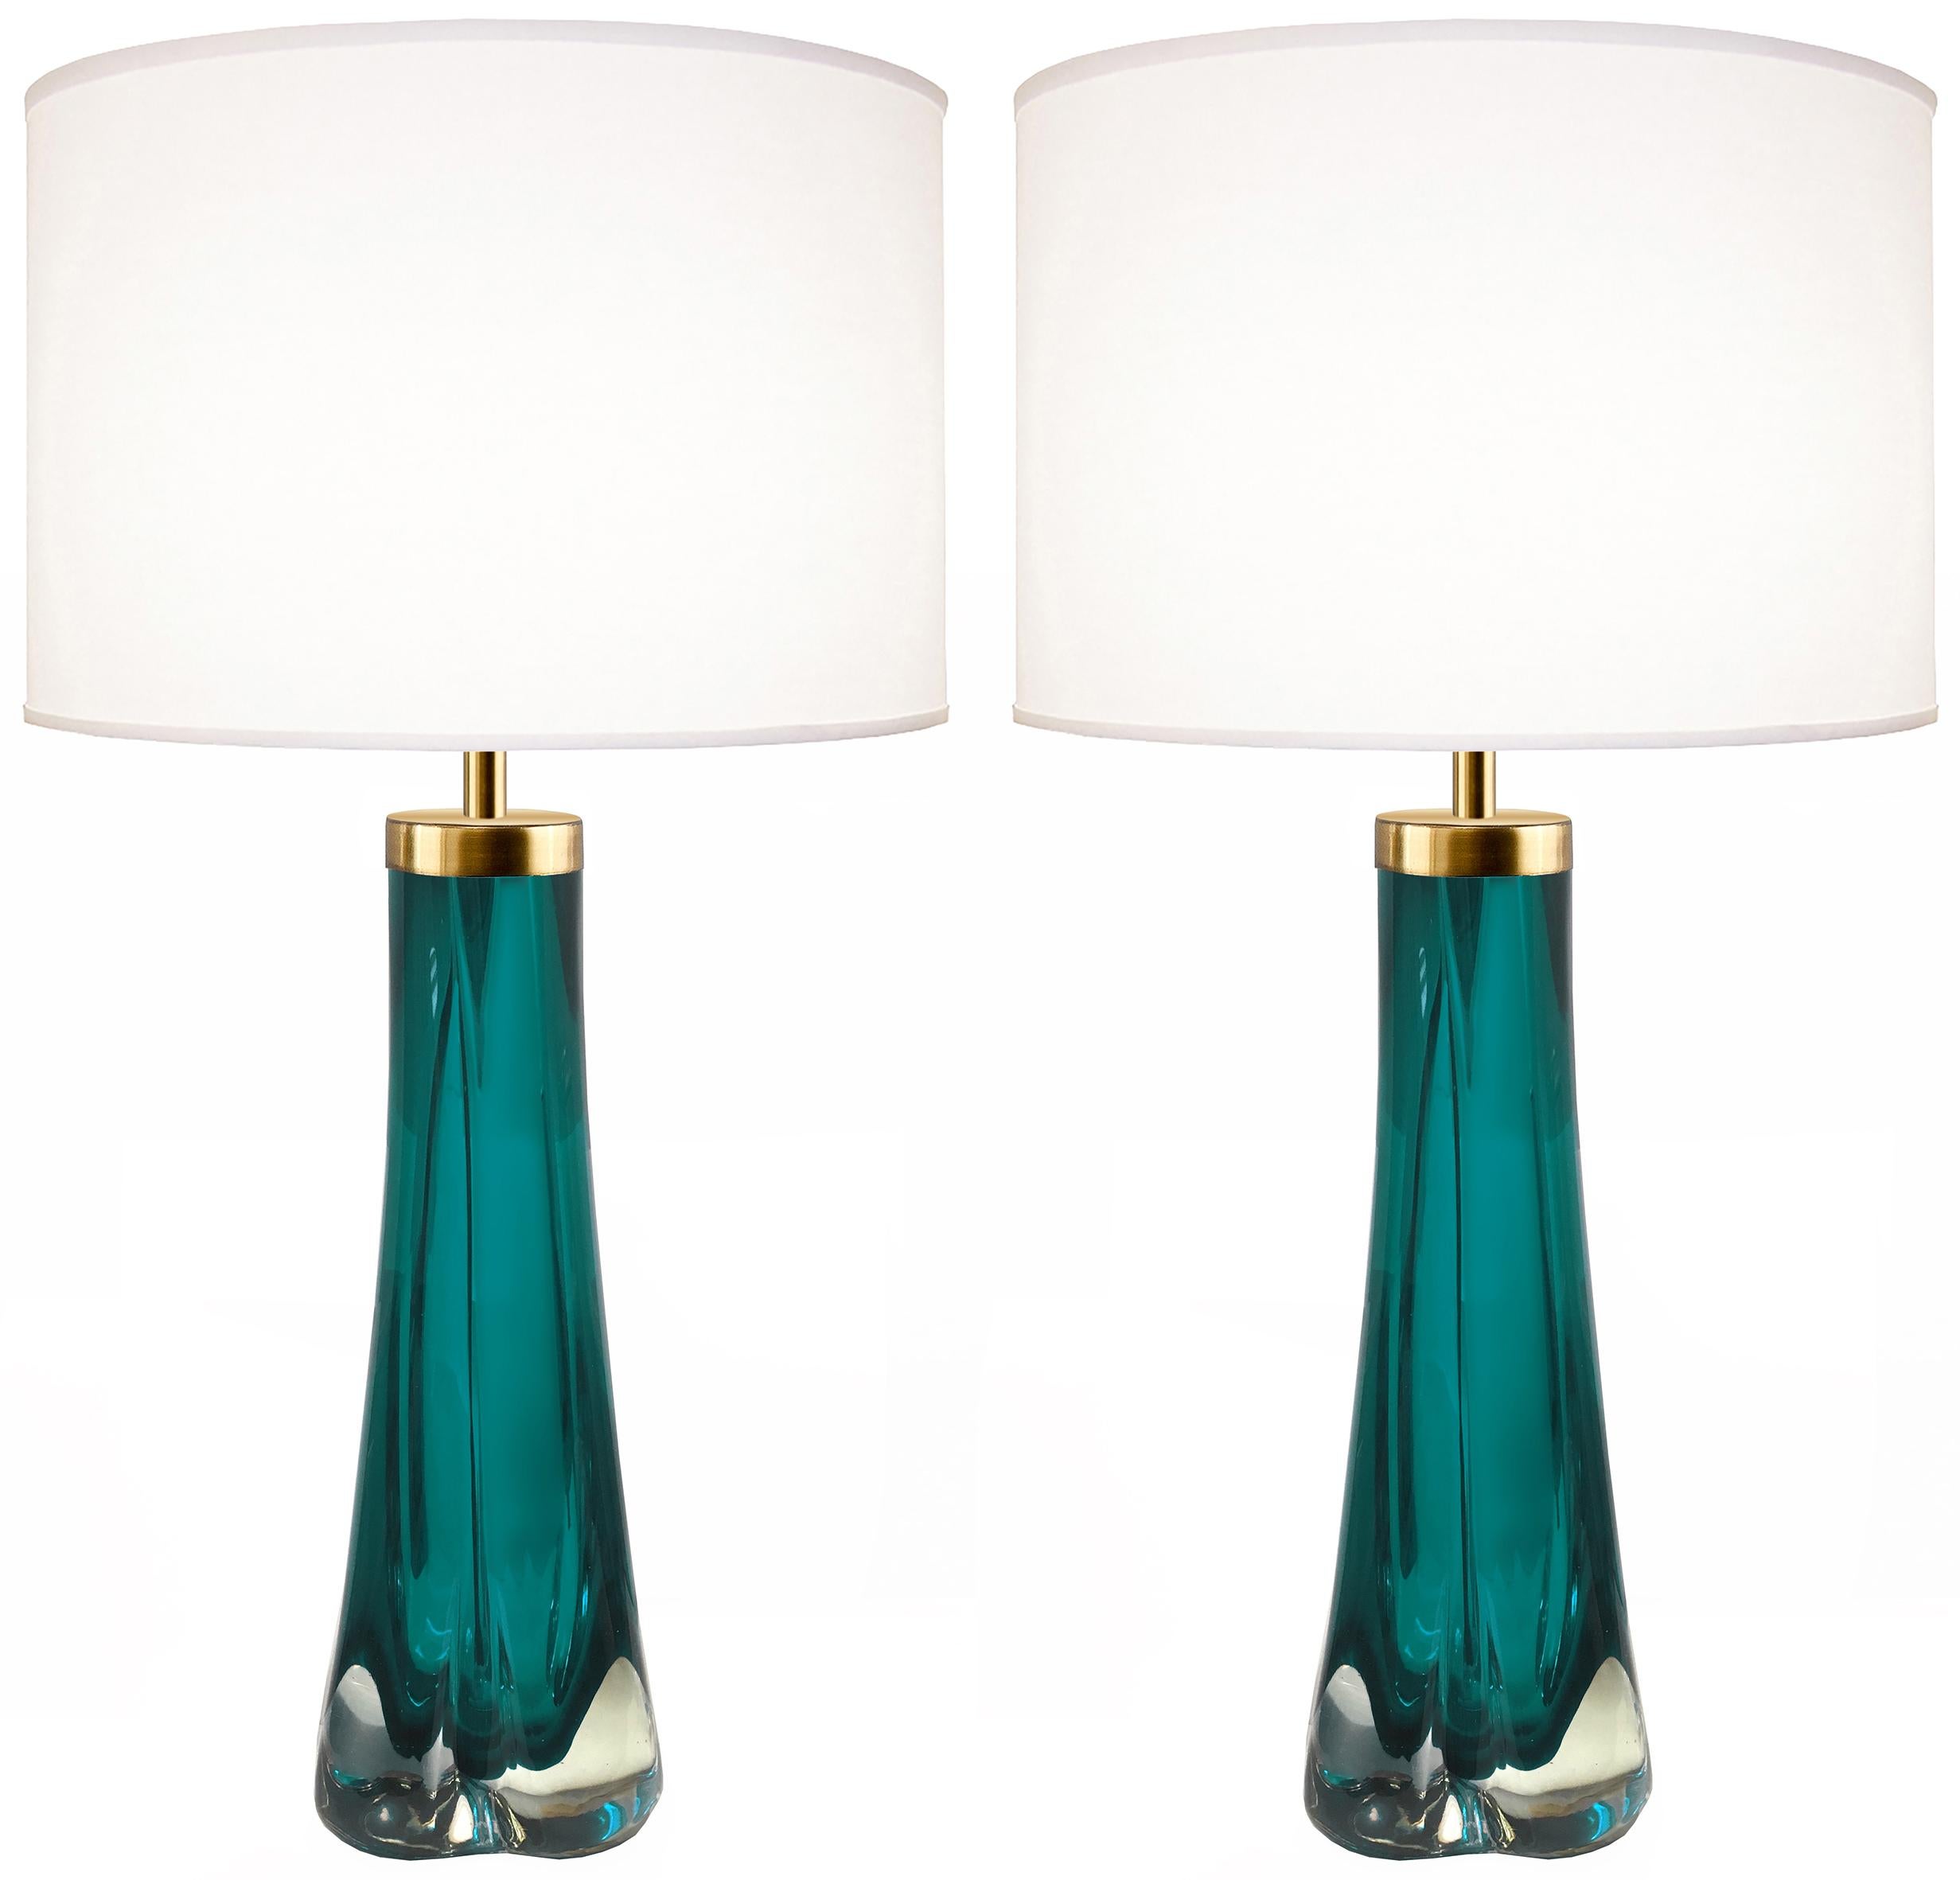 Pair of Thick Cased Aqua Glass Lamps from Craig Van Den Brulle to Order In Excellent Condition For Sale In New York, NY